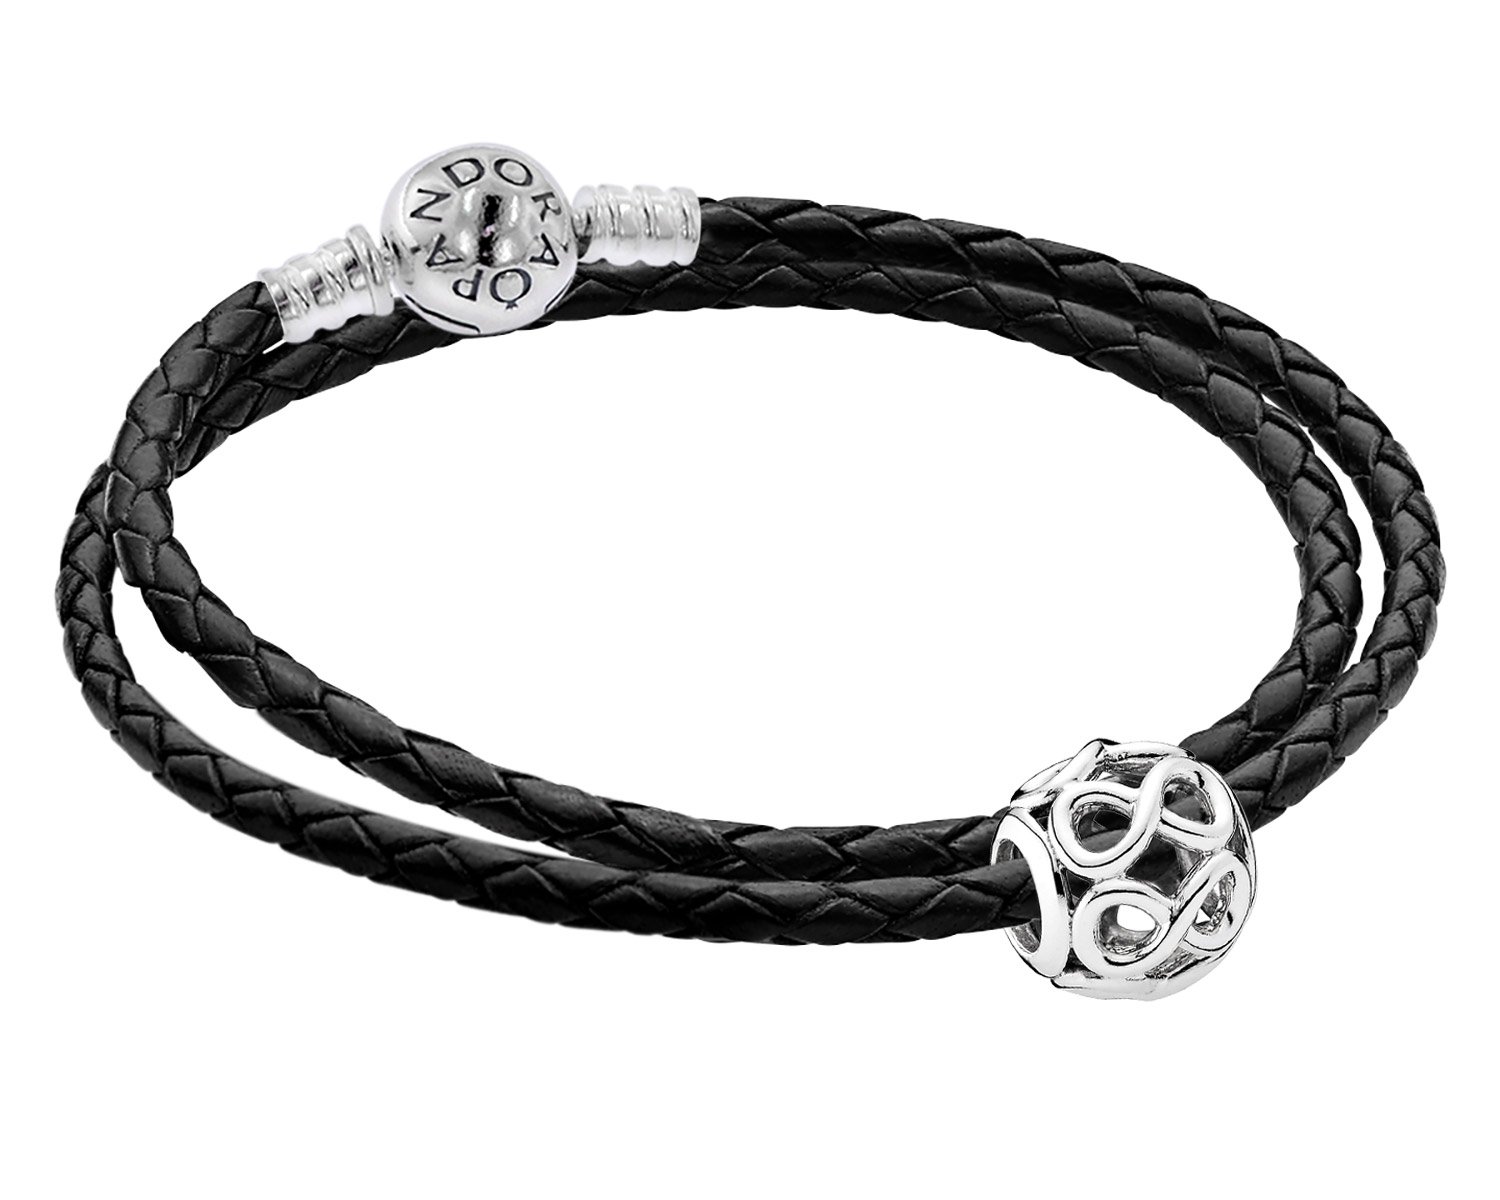 Genuine Leather Knit Rope Chains 2 M Length For DIY Pandora Bracelets And  Necklaces Best Jewelry Stores Accessories From Lifeforyou, $4.57 |  DHgate.Com